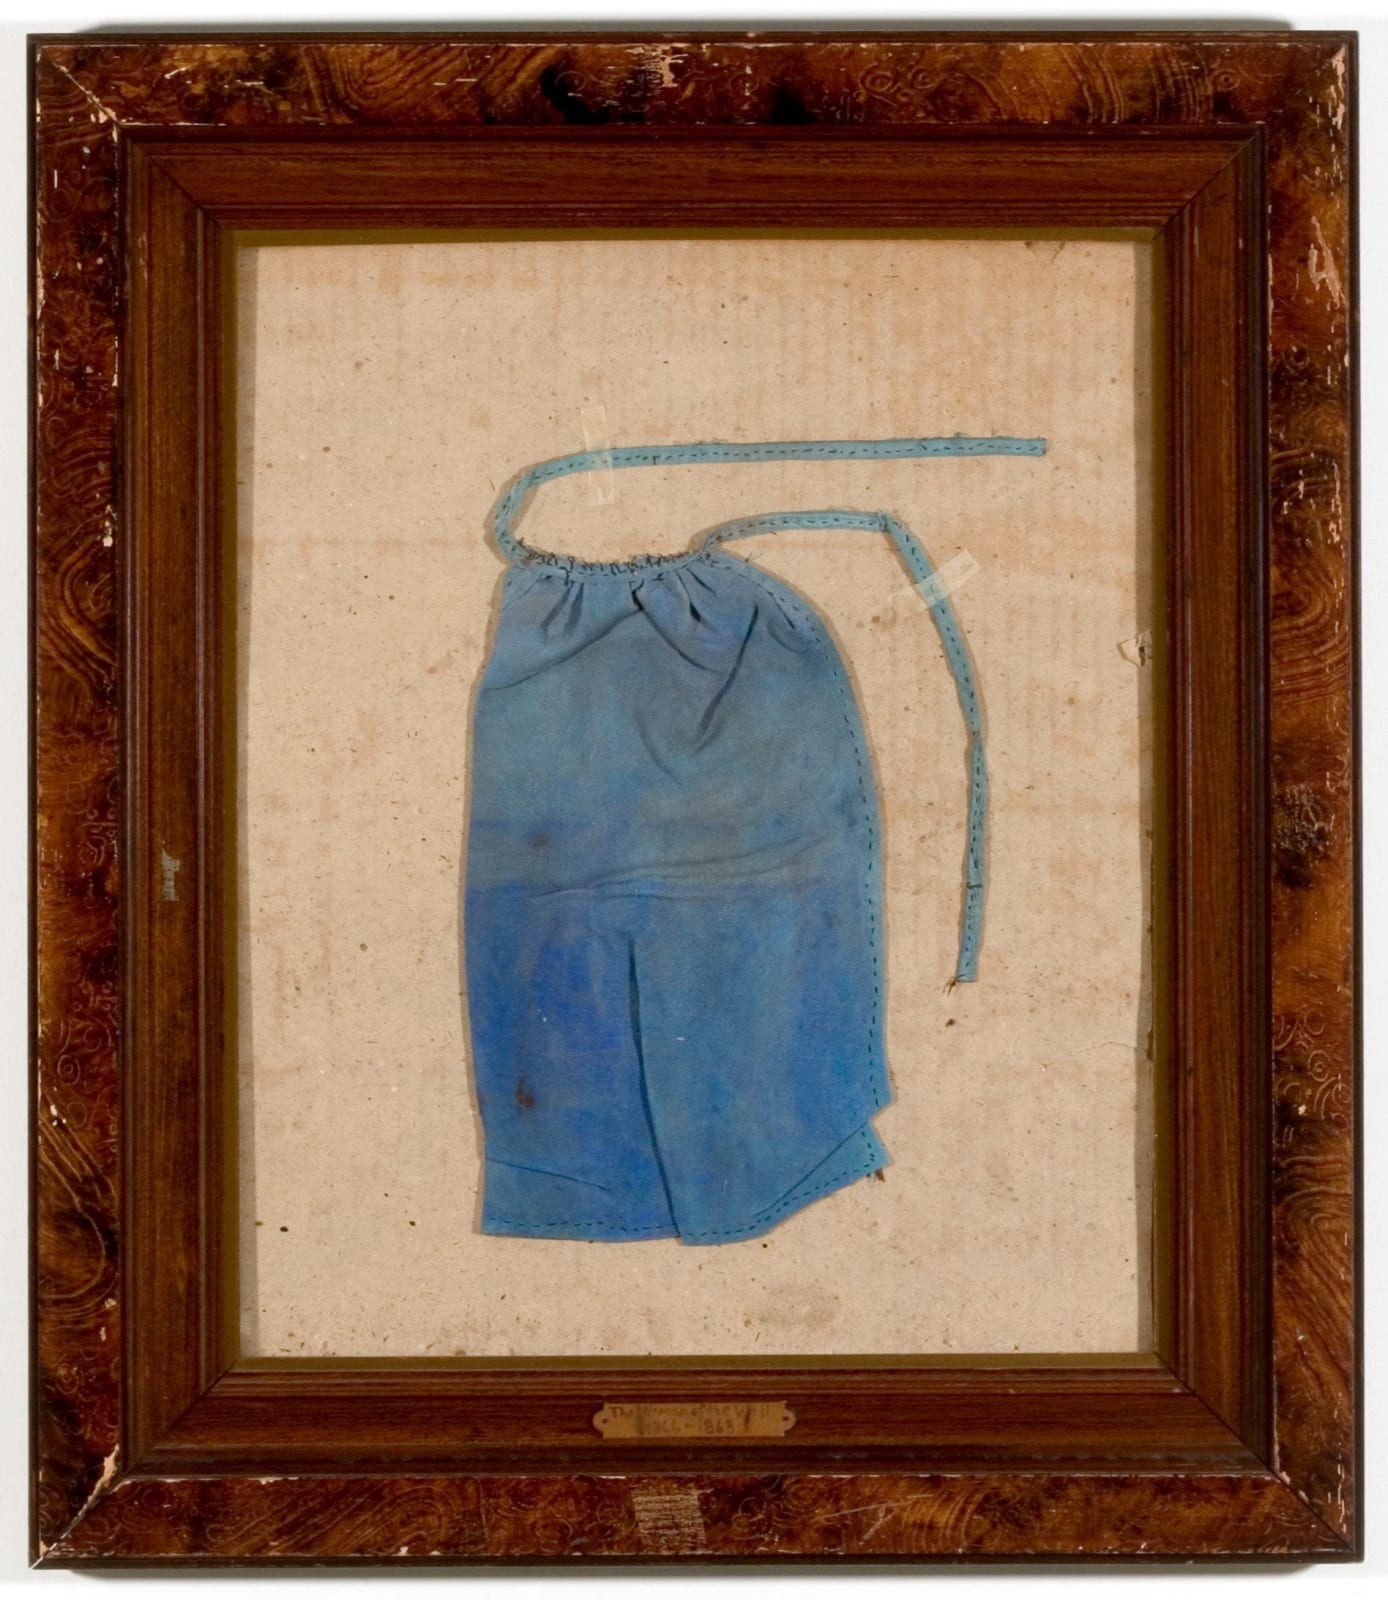 Suzanne Bocanegra, All The Aprons in Millet’s Paintings:The Woman at the Well 1866-1868, 2004